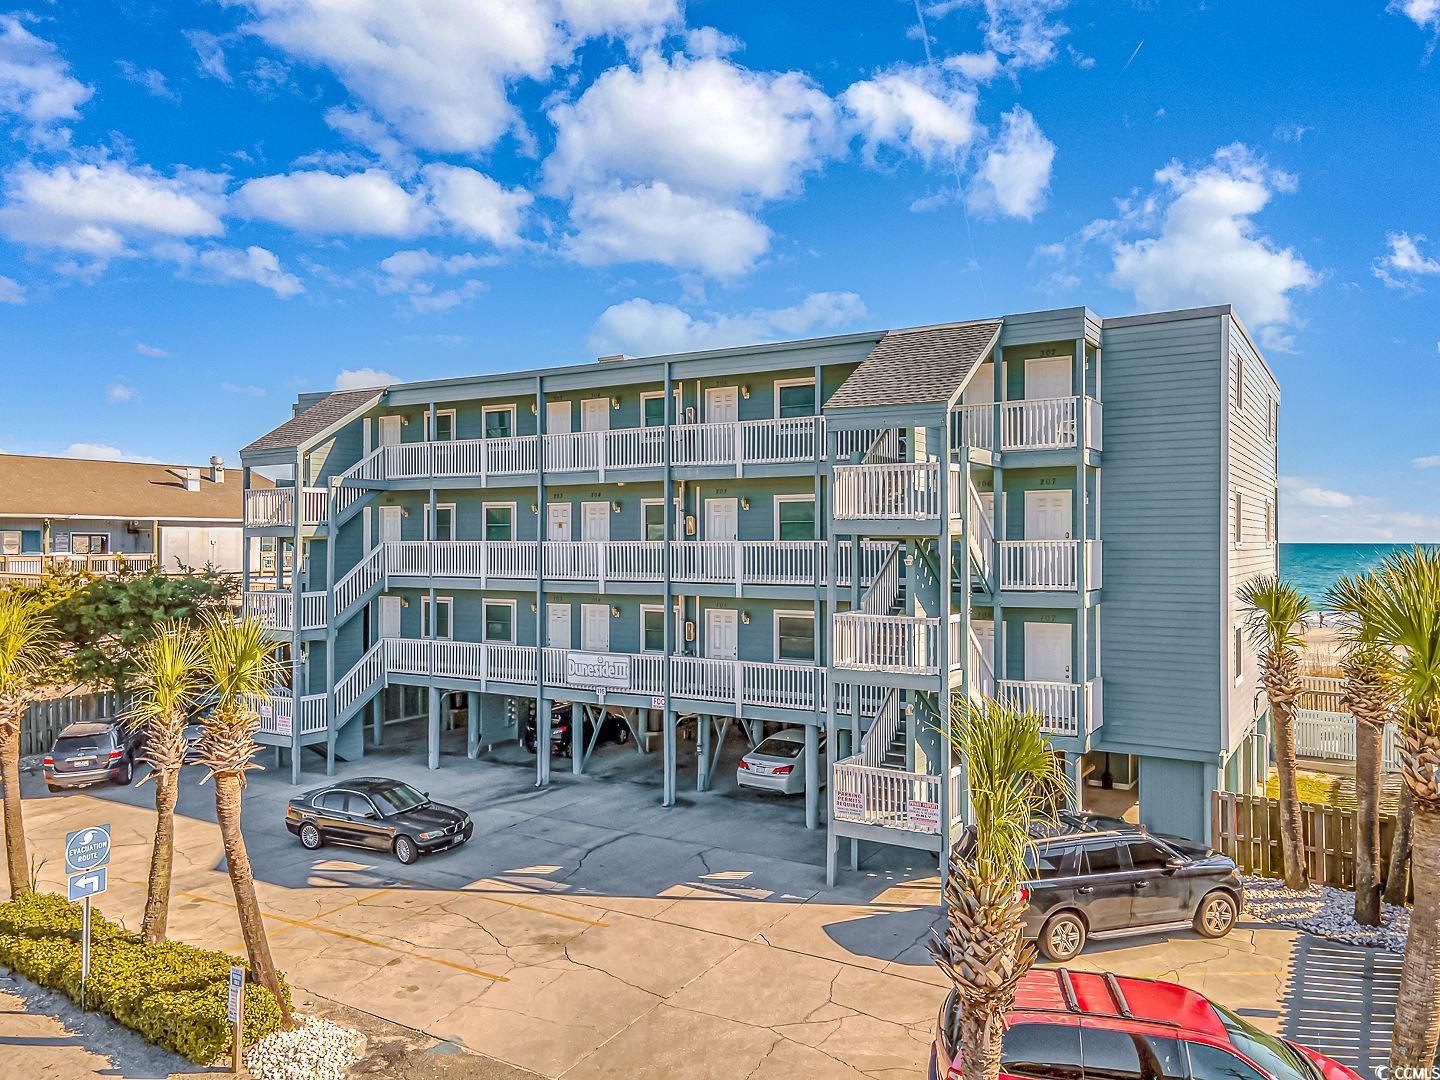 beautiful oceanfront unit in one of the most desirable areas on the grand strand! just steps to the sand and right beside the garden city pier with entertainment, shopping and night life. this is a one bedroom one bath condo with a great use of space that sleeps six! sit out on your balcony and enjoy the waves crashing as well as all the beach action in the privacy of your own space. move in ready and fully furnished including a pull out sofa in living room. primary residence or great rental income potential for weekly or long-term rental. oceanfront pool and a storage unit located on the ground floor.